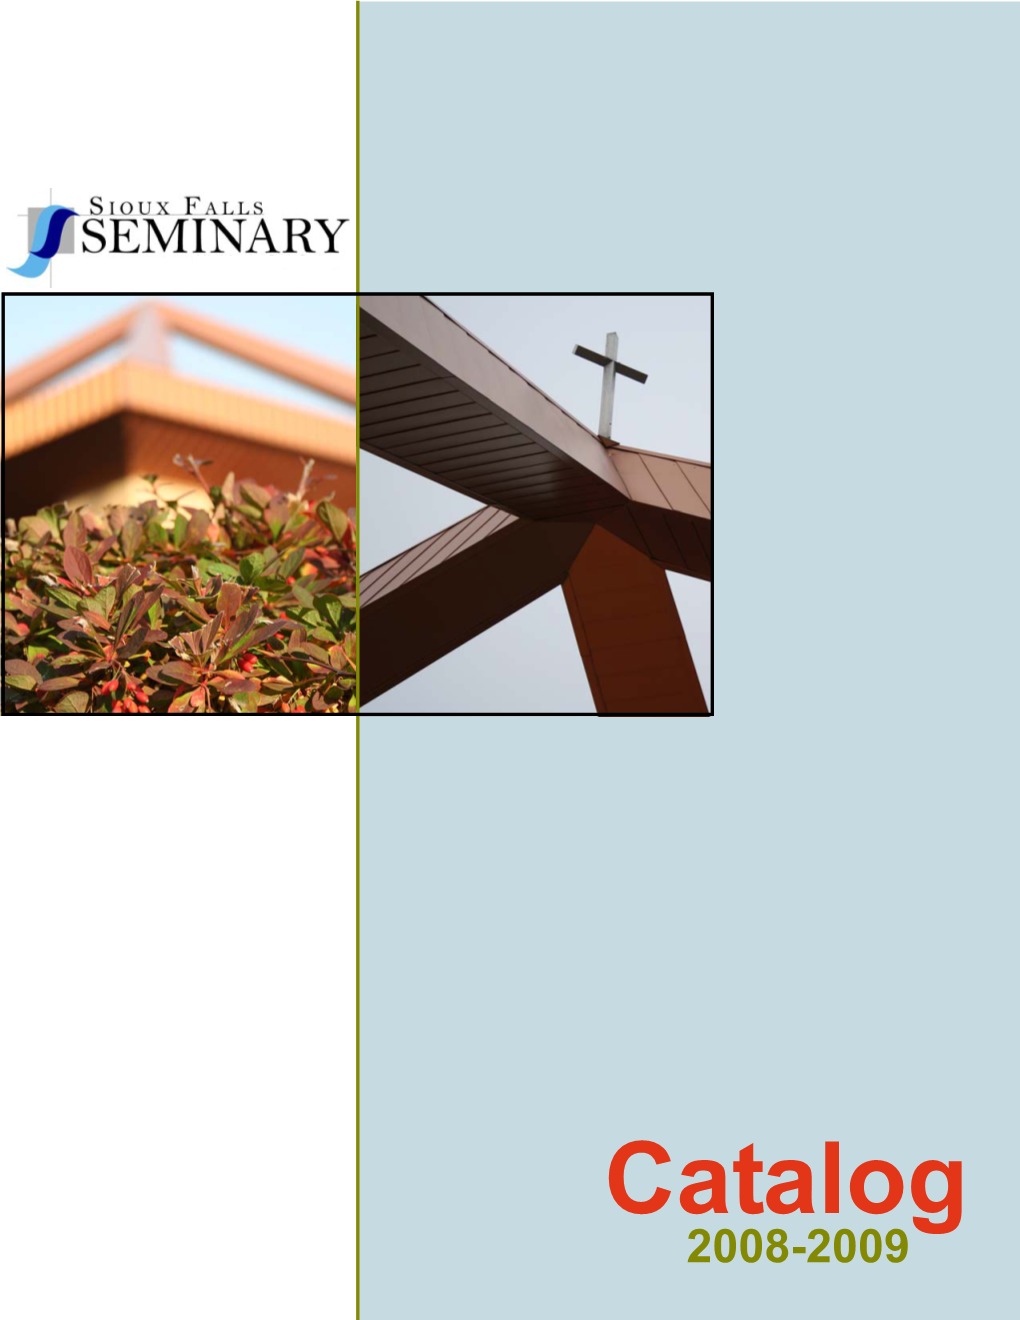 Catalog 2008-2009 Our Mission Sioux Falls Seminary Equips Servant Leaders for the Ministries of Christ in the Church and in the World